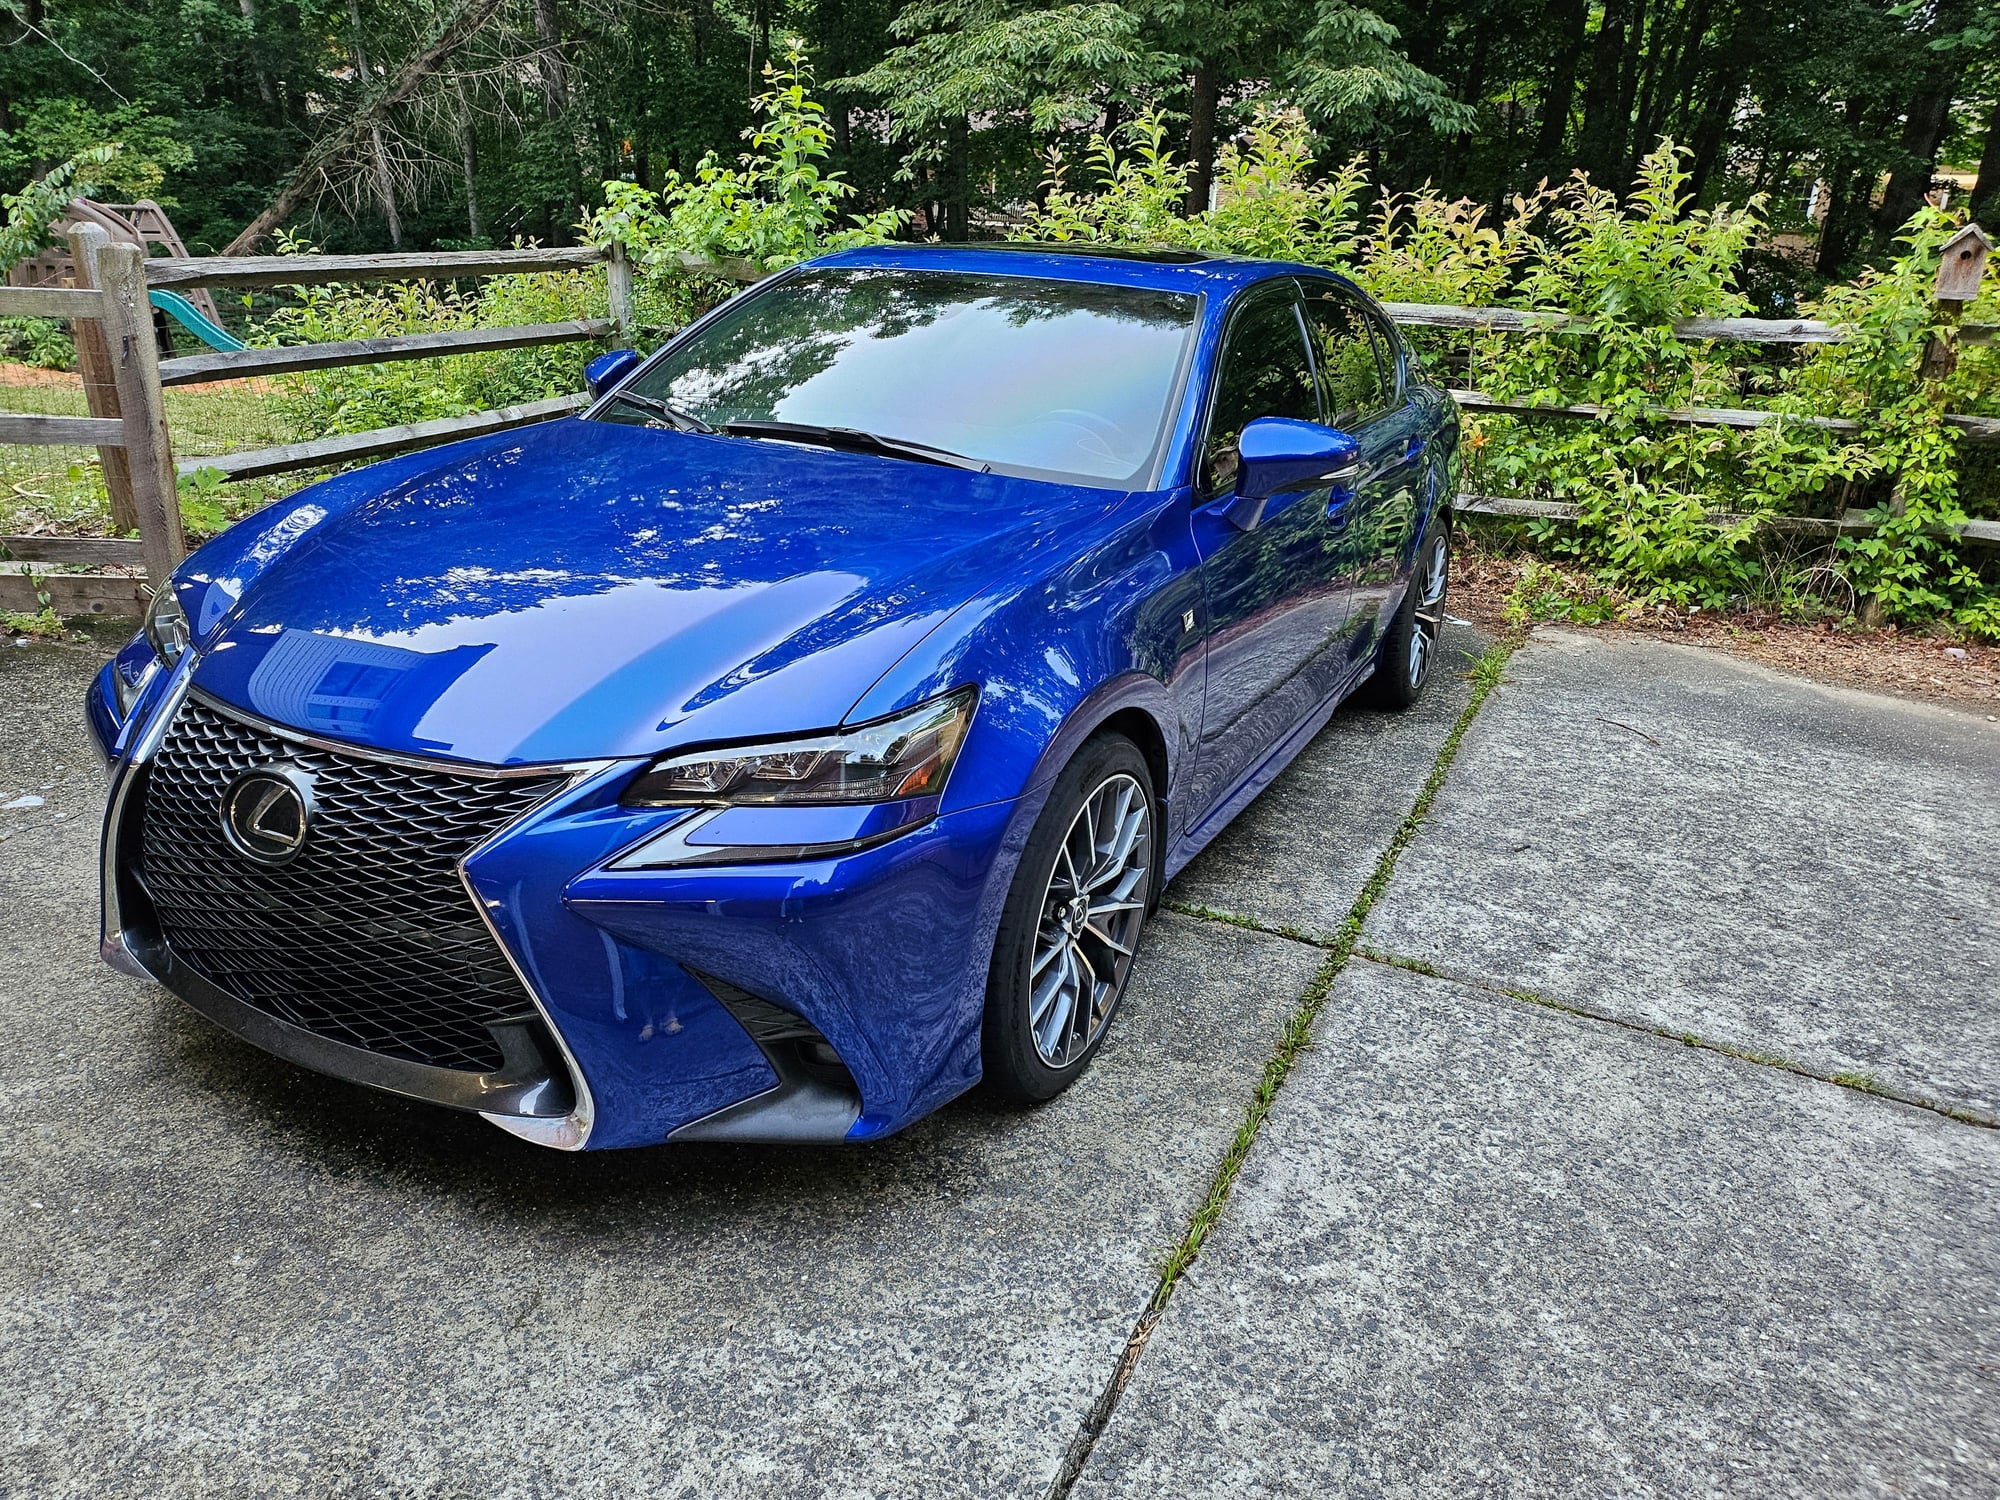 2018 Lexus GS350 - 2018 usb gs350 rwd fsport with luxury options 37k obo - Used - Charlotte, NC 28105, United States